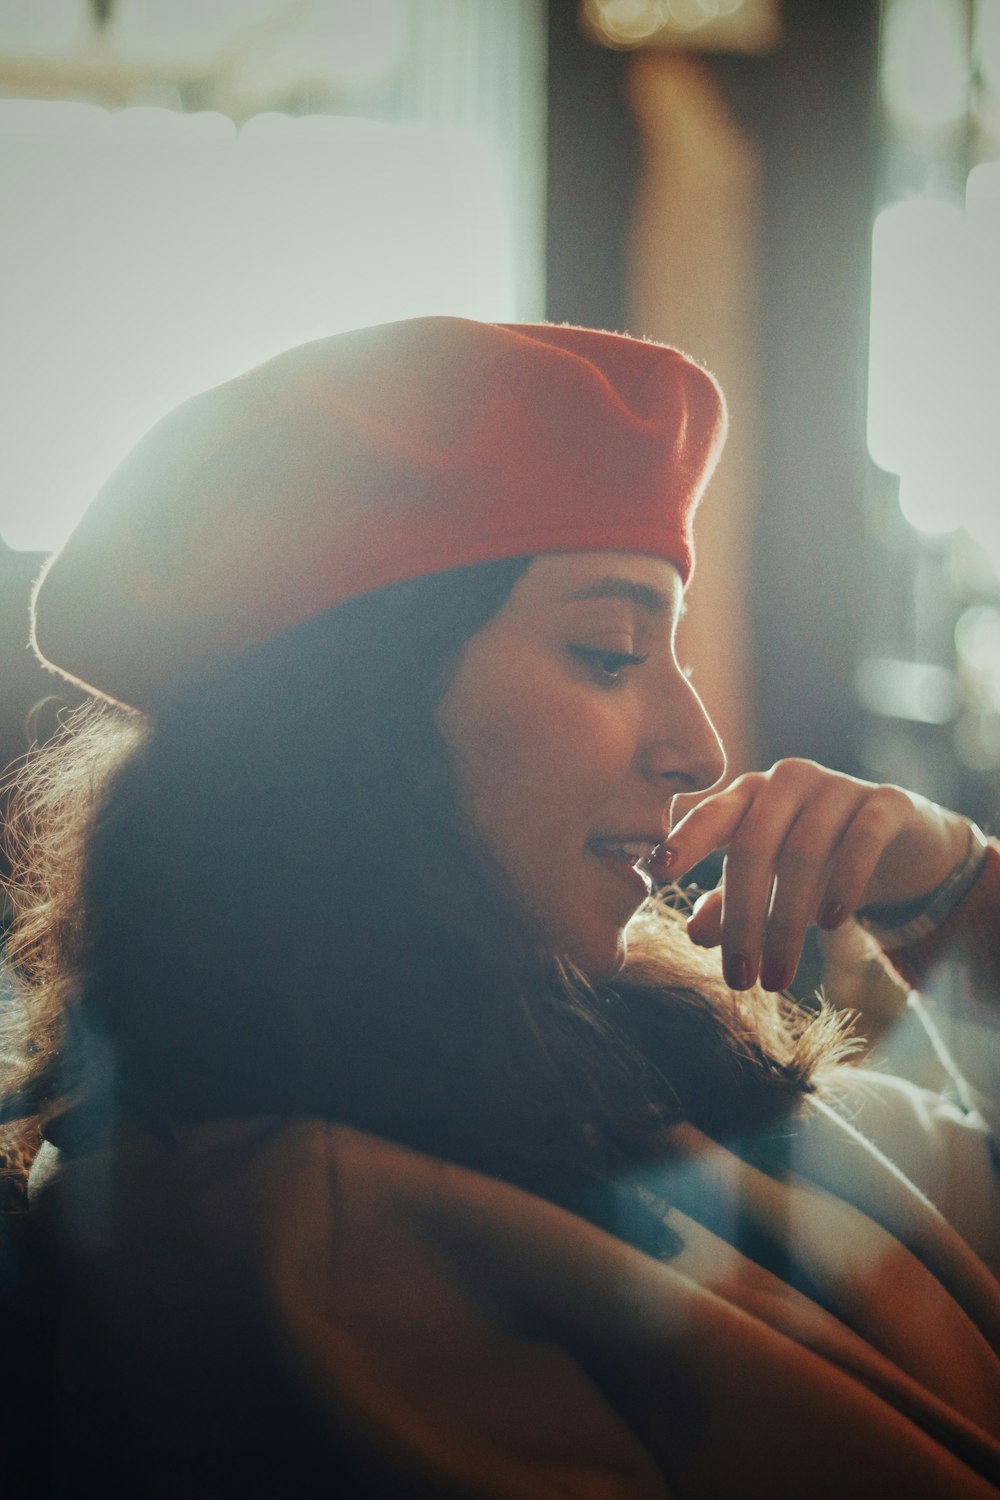 a woman in a red hat talking on a cell phone